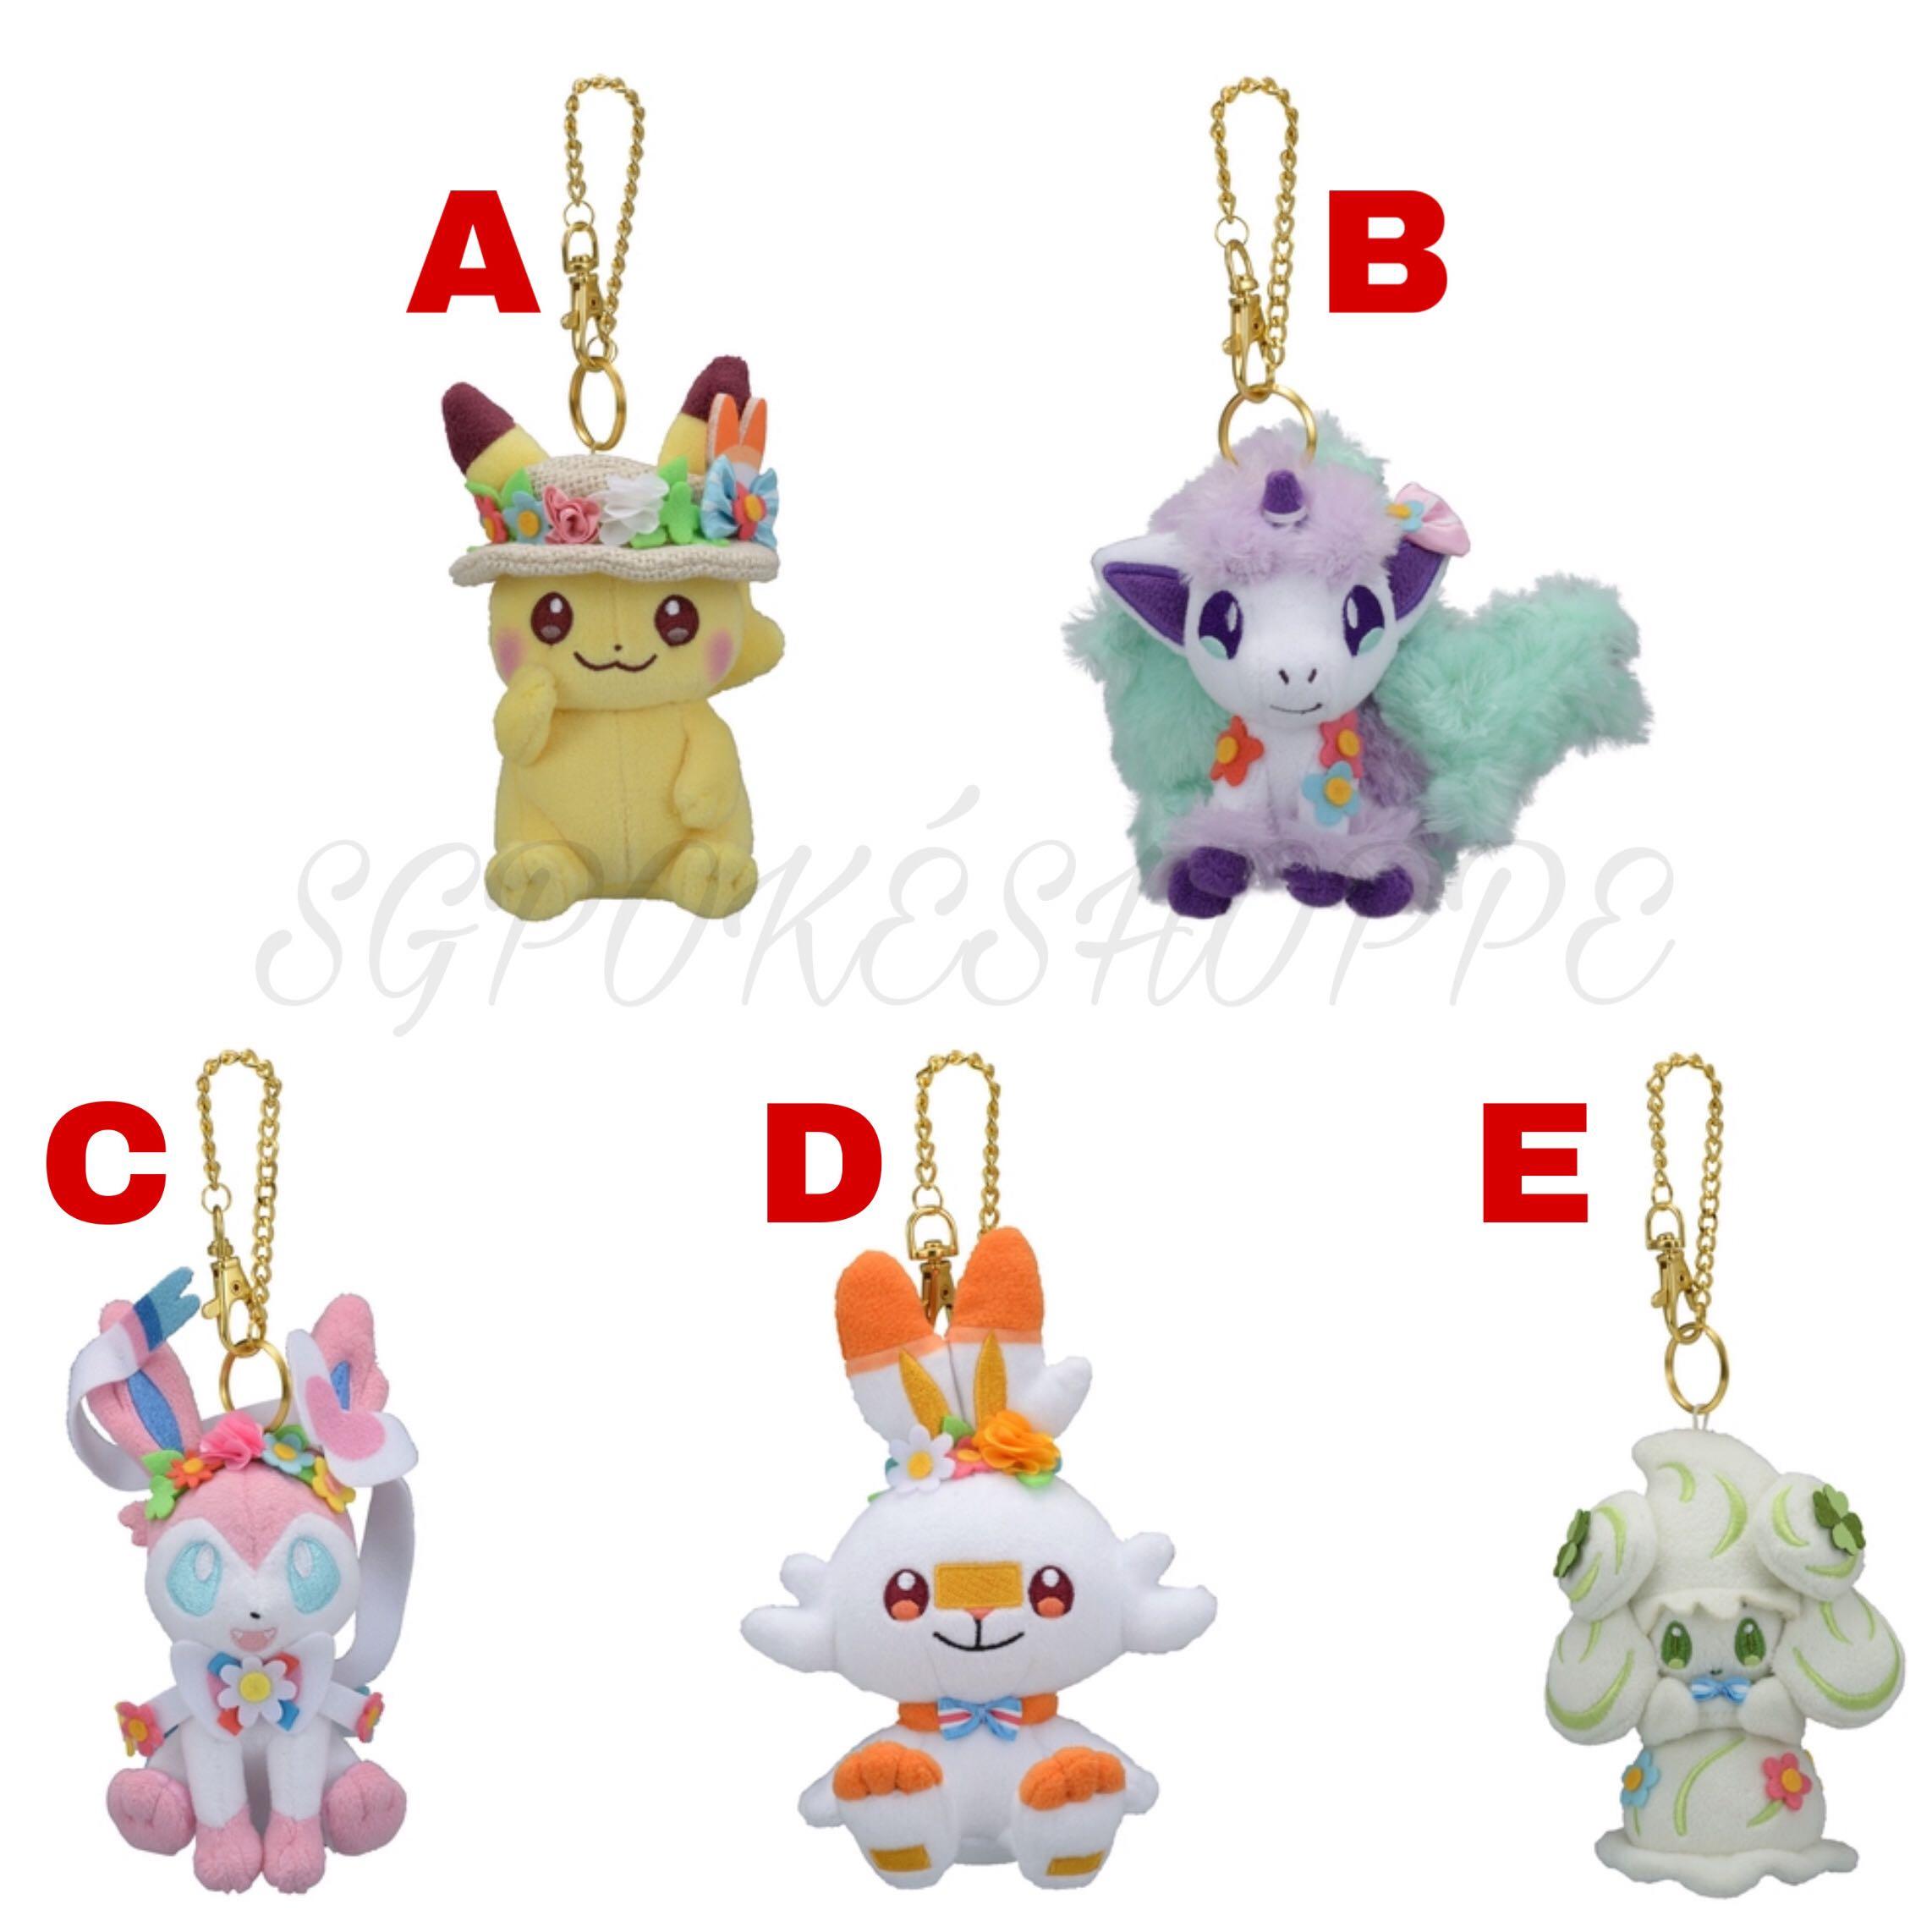 Pokemon Easter Plush Online Discount Shop For Electronics Apparel Toys Books Games Computers Shoes Jewelry Watches Baby Products Sports Outdoors Office Products Bed Bath Furniture Tools Hardware Automotive Parts